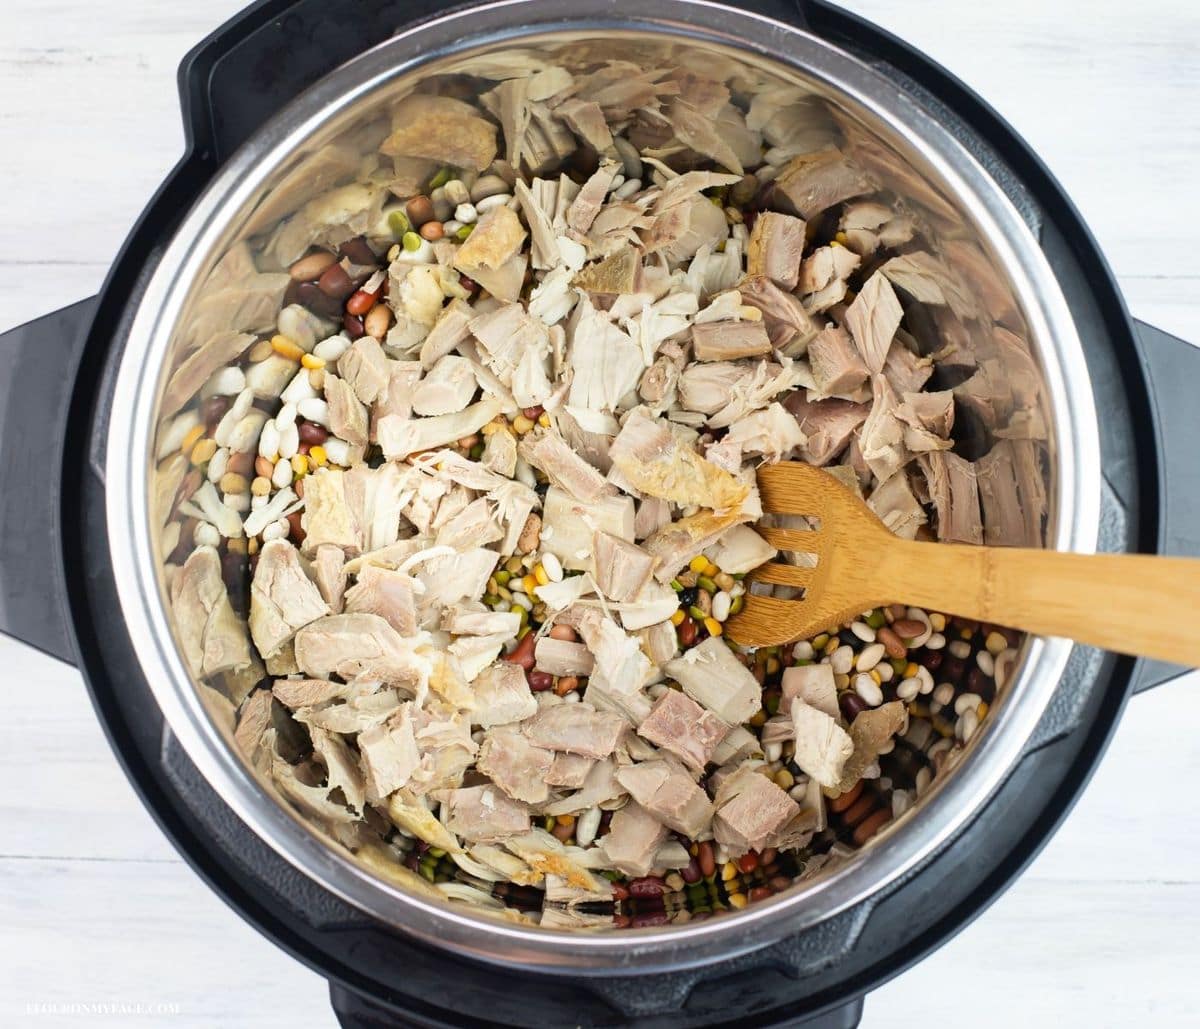 Overhead image of cubed turkey and dried beans mixed in the pot.